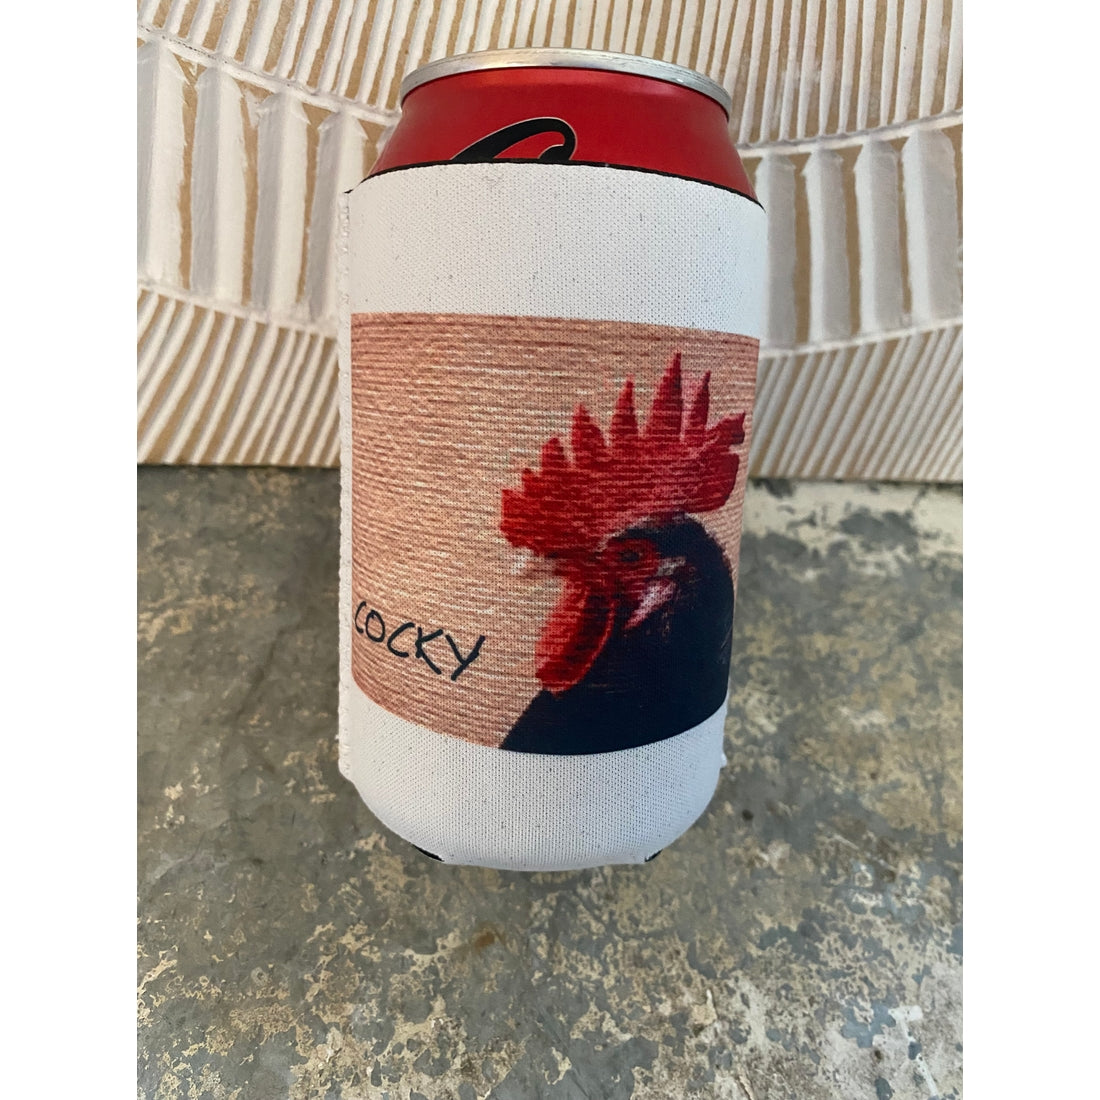 "Cocky" Rooster Neoprene Can Sleeve